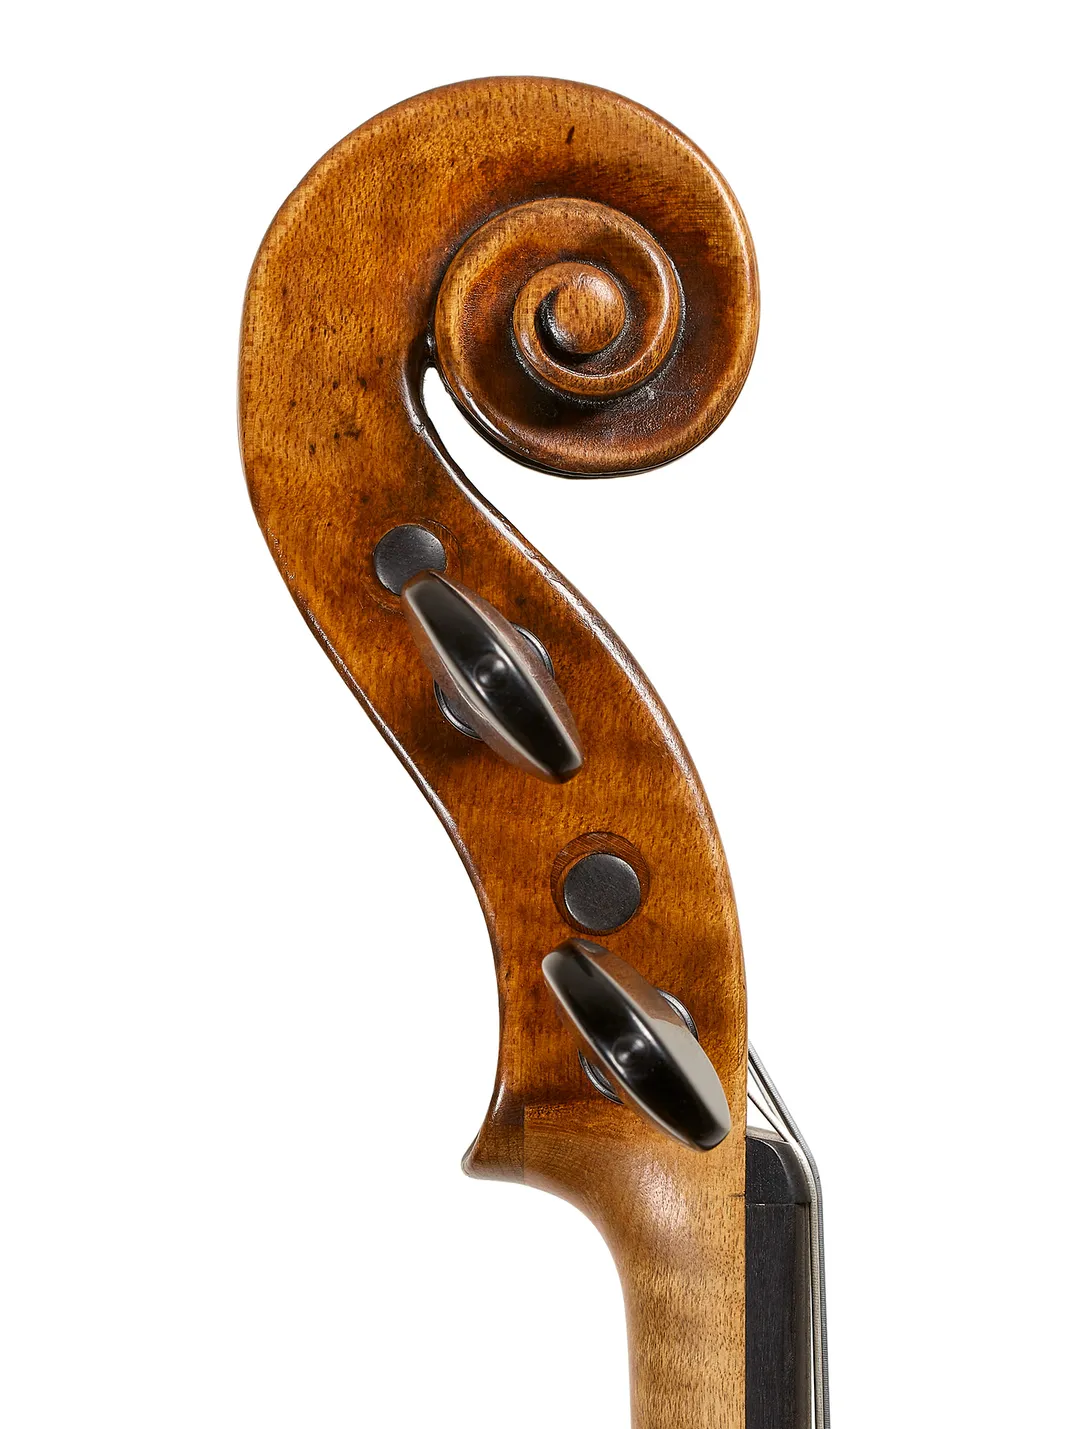 The “da Vinci” was more refined than other violins at the time.